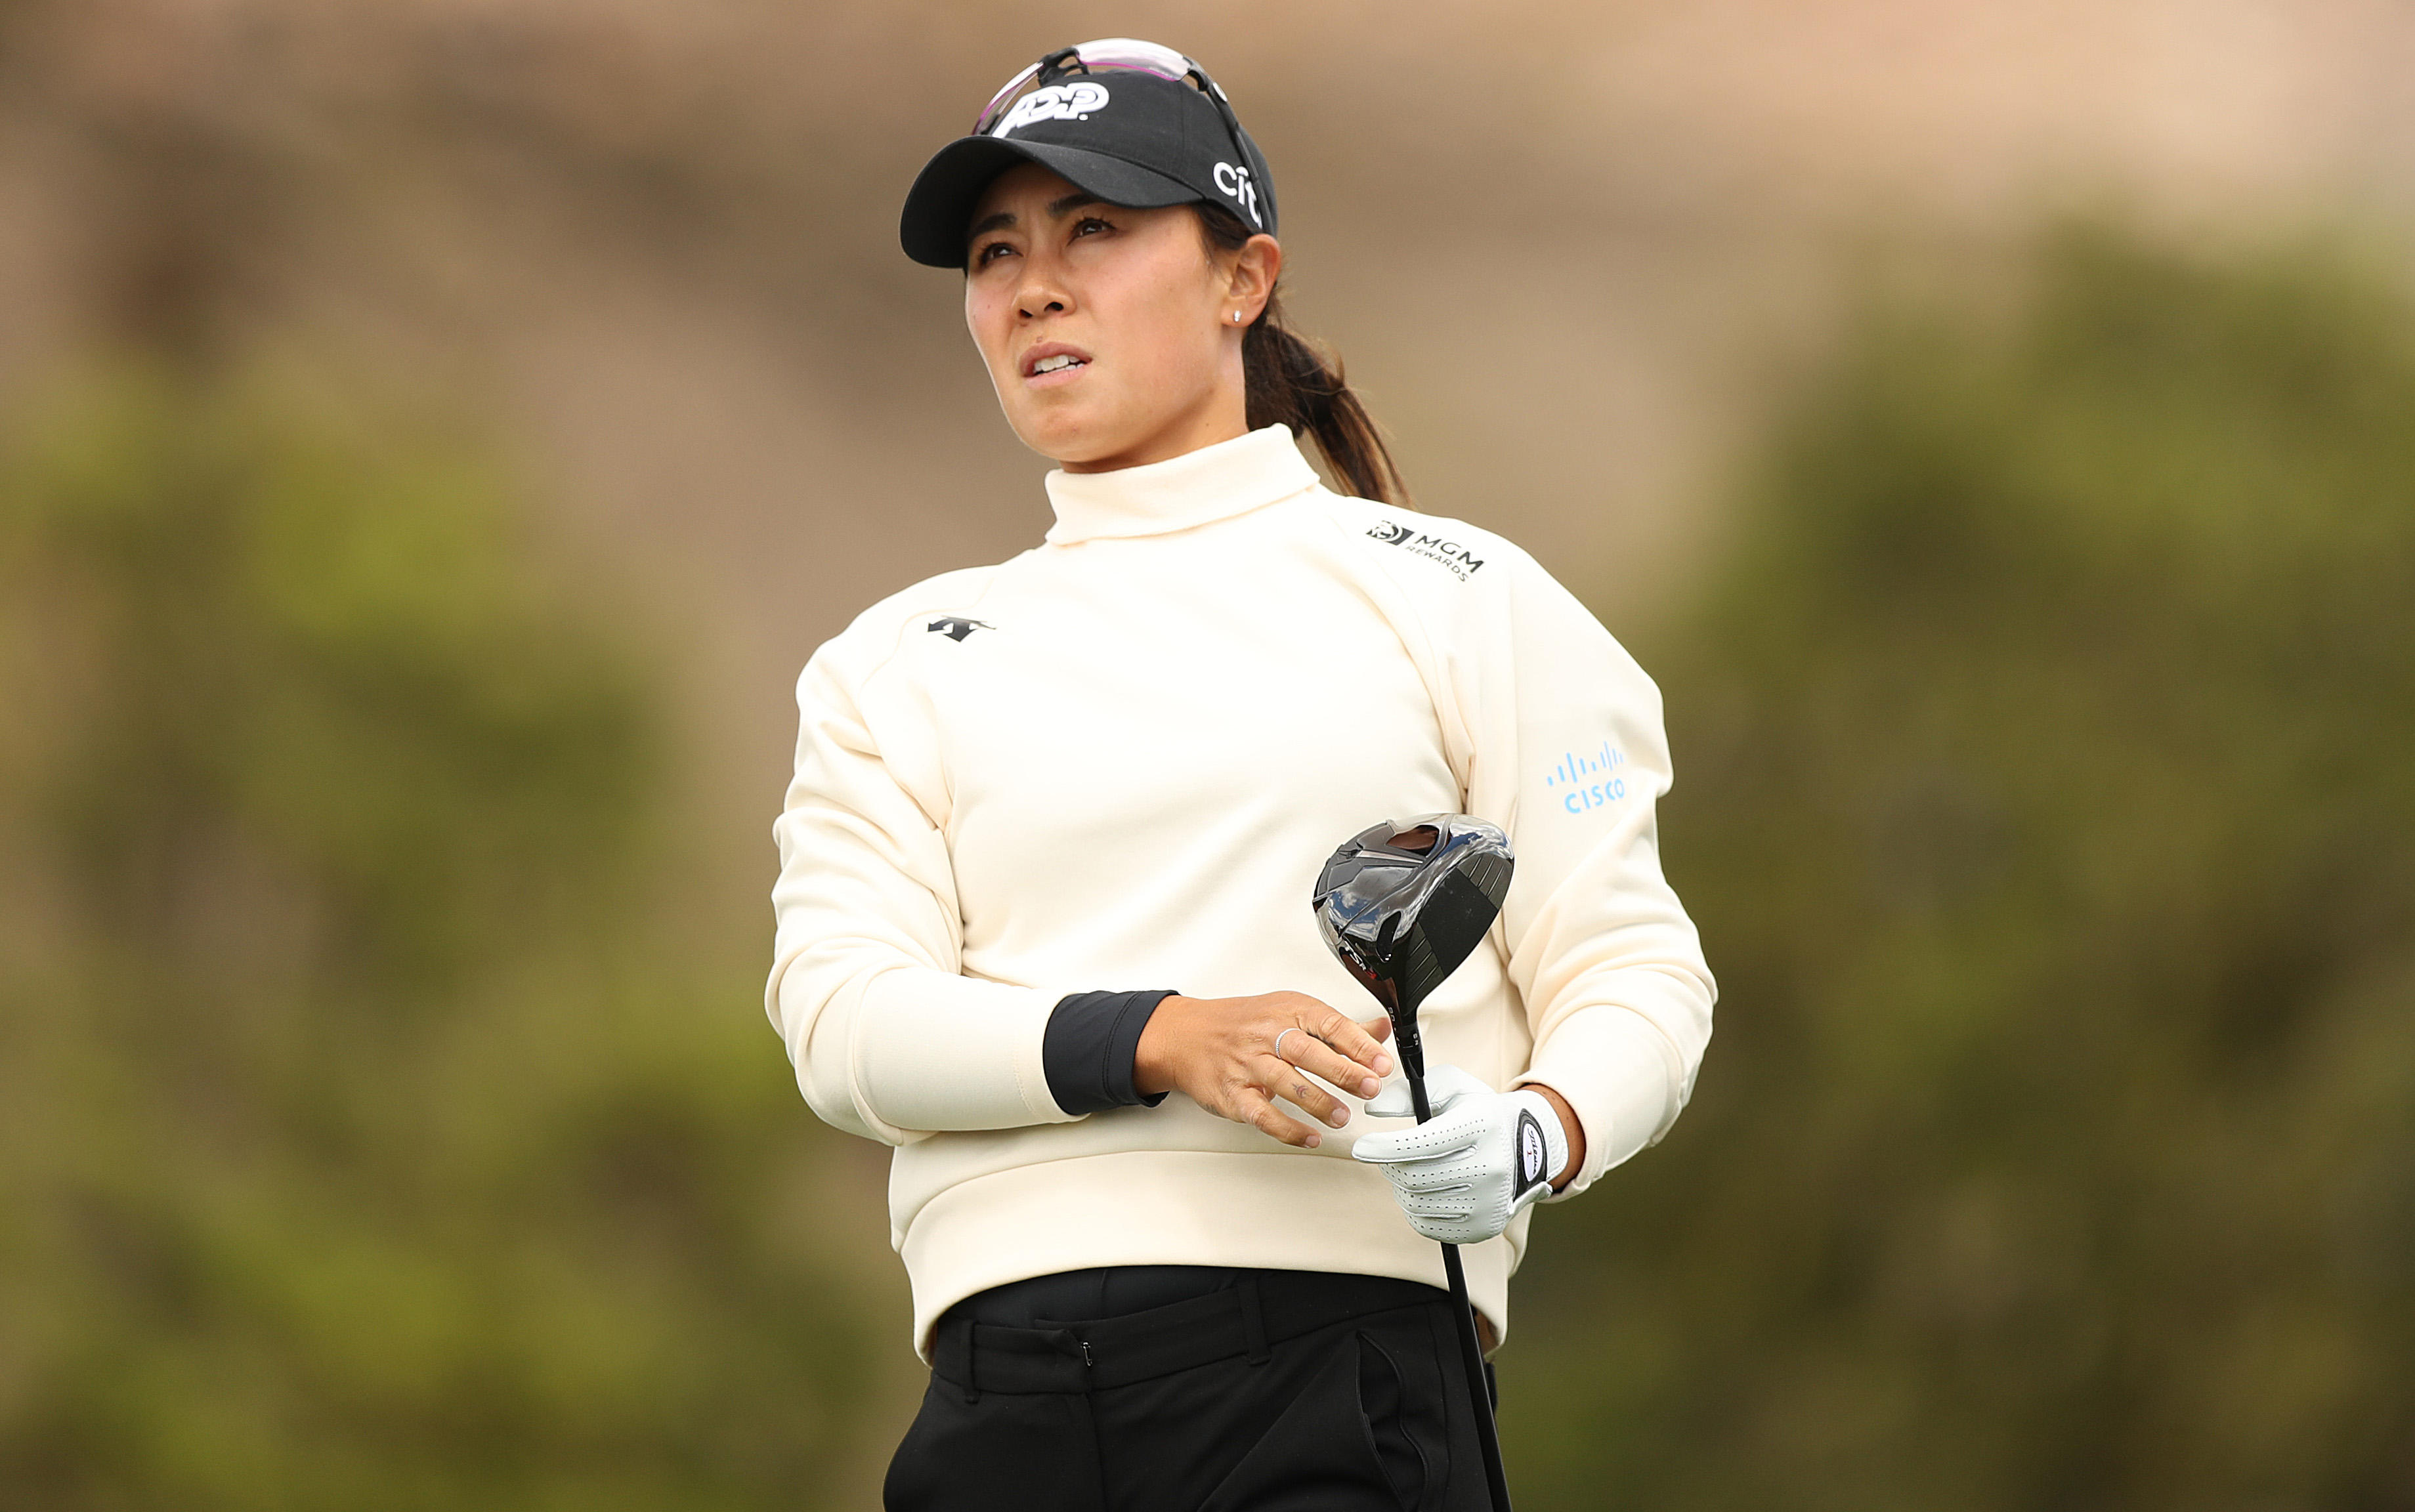 Danielle Kang reveals shes in the hospital after withdrawing from LPGA tournament Golf News and Tour Information GolfDigest